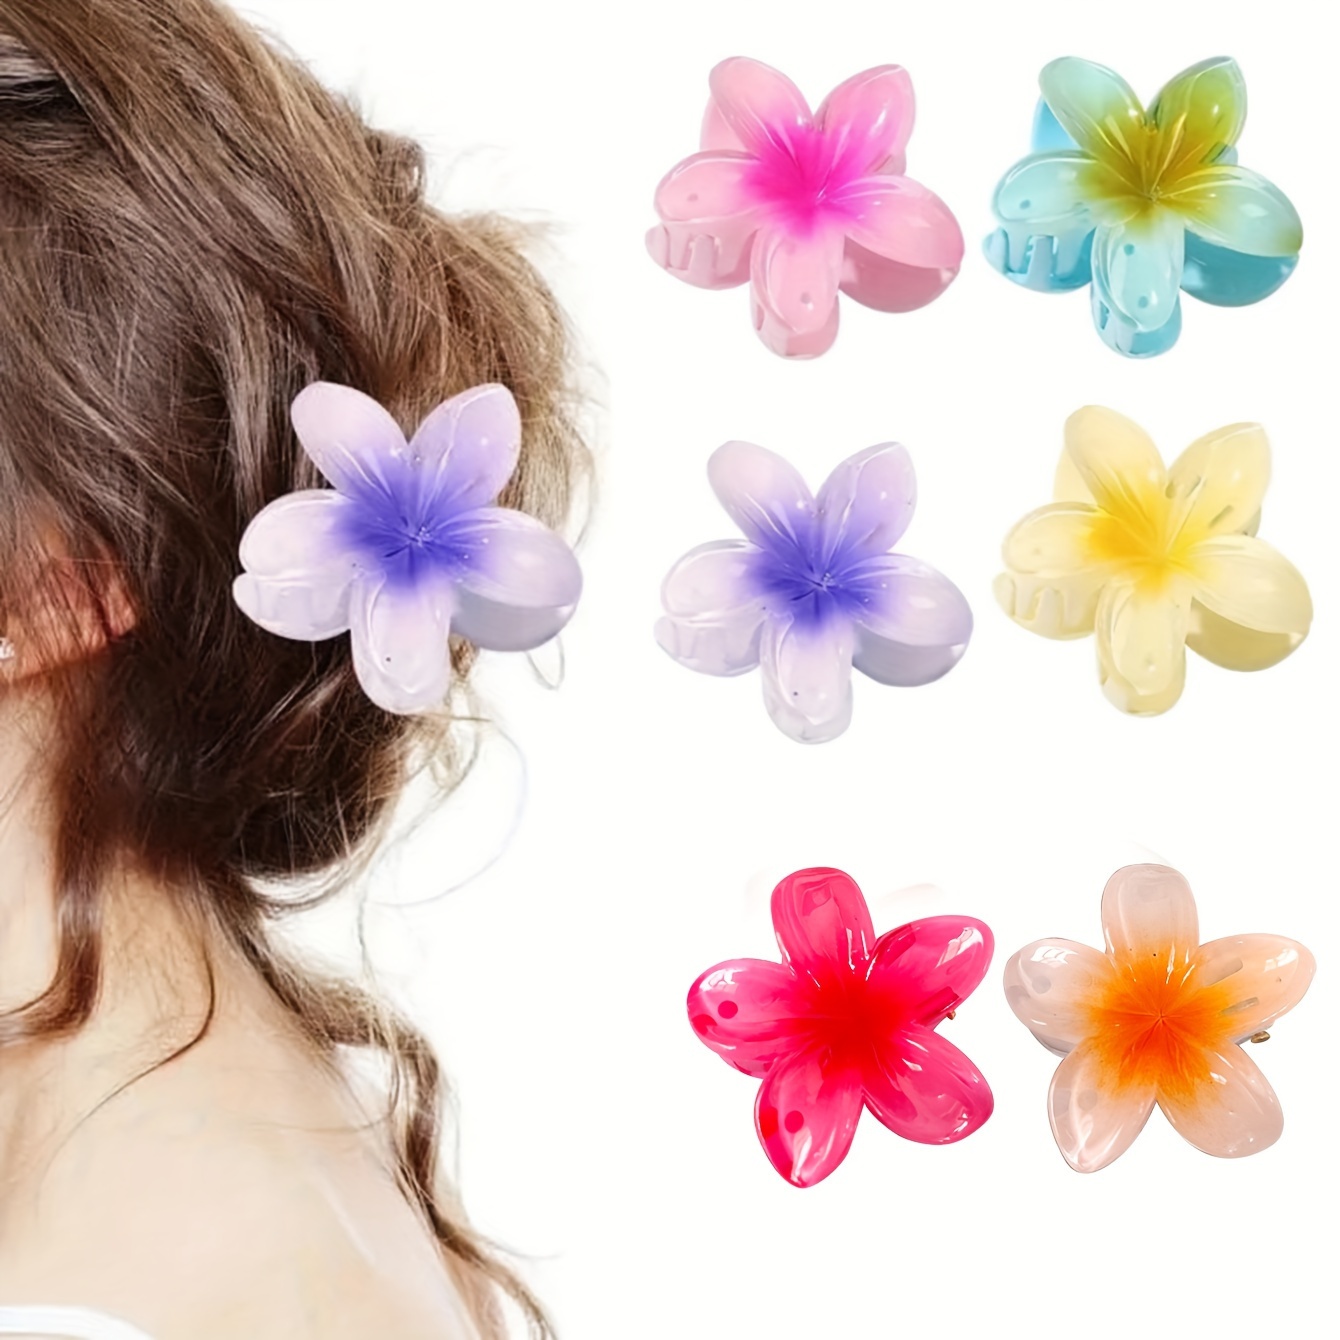 

6-piece Set Elegant Mini Flower Hair Claw Clips - Multicolor, Cute & Fresh Design For Women And Girls - Perfect For Everyday & Party Styling